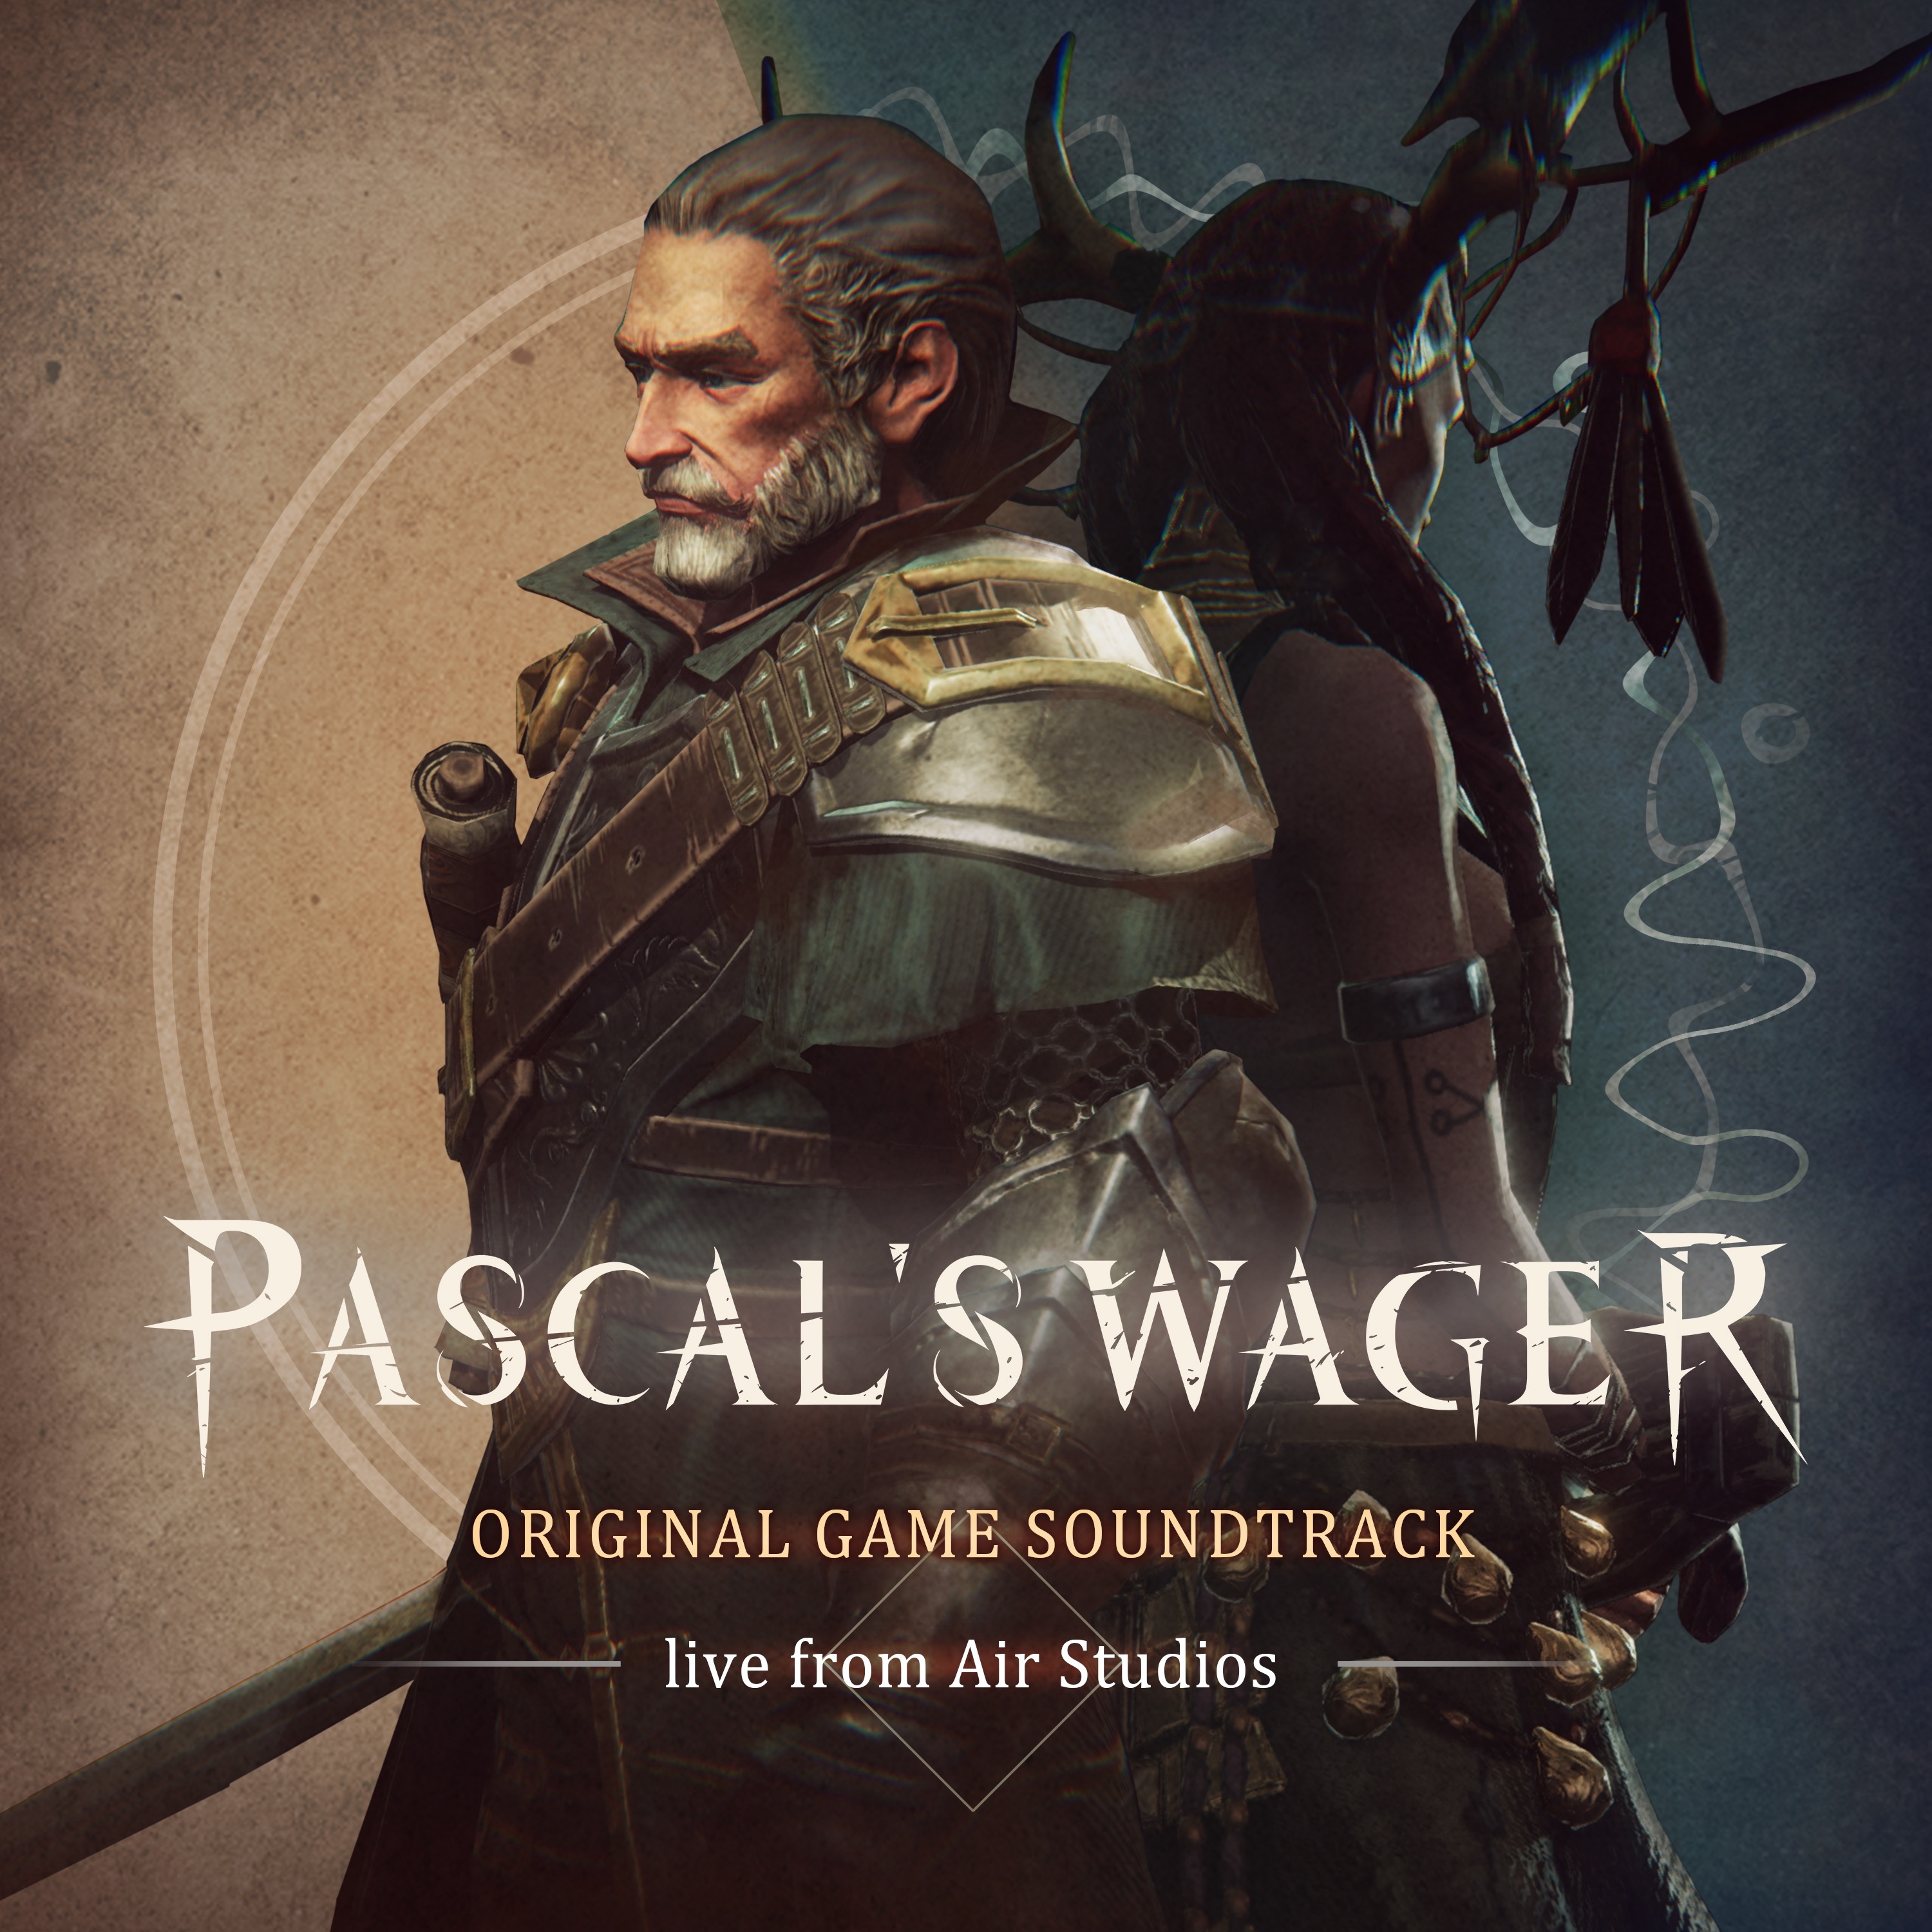 Pascal s wager на русском. Игра Pascal's Wager. Pascal's Wager Виола. Pascal's Wager 2. Pascal's Wager: Definitive Edition обложка.